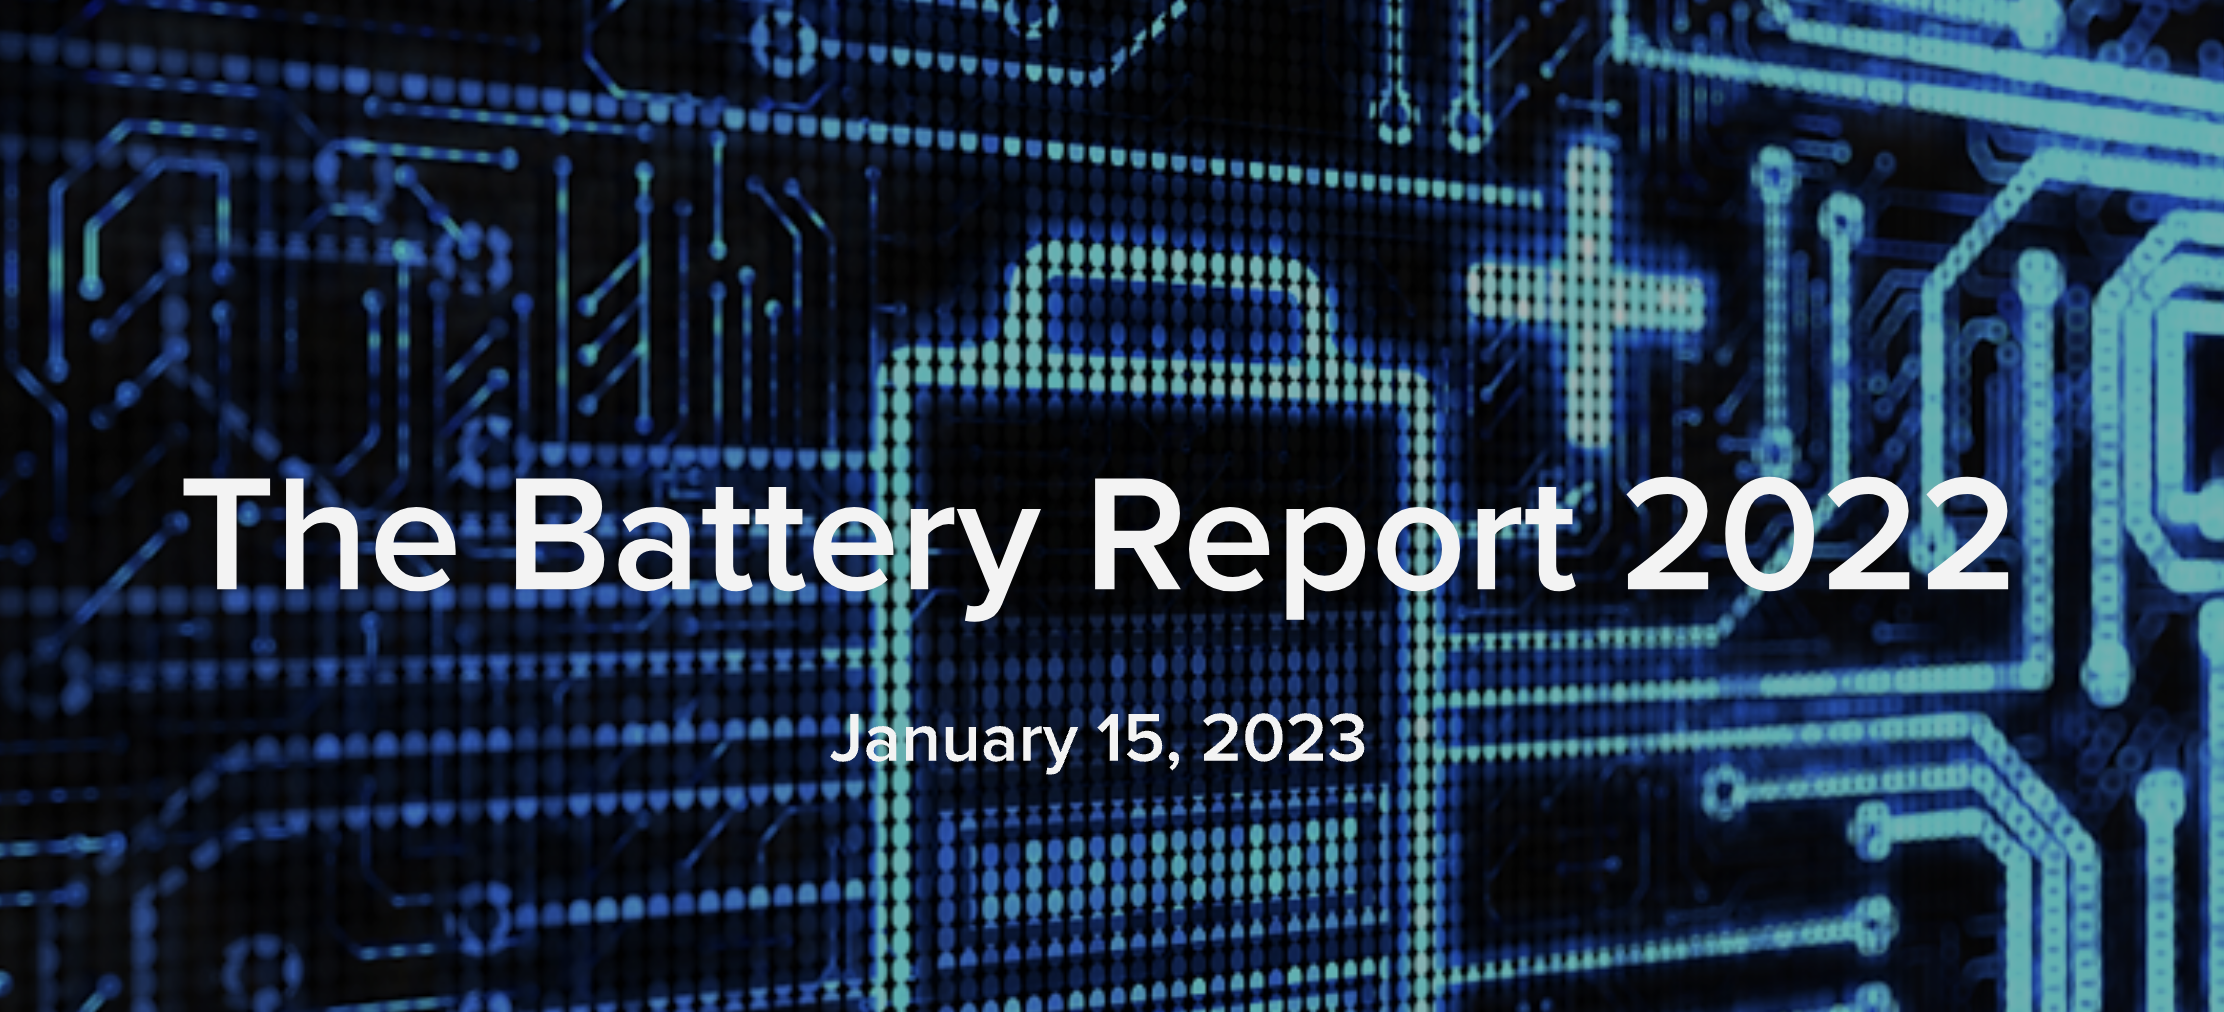 The Battery Supply Chain and Volta Foundation's Battery Report  2022